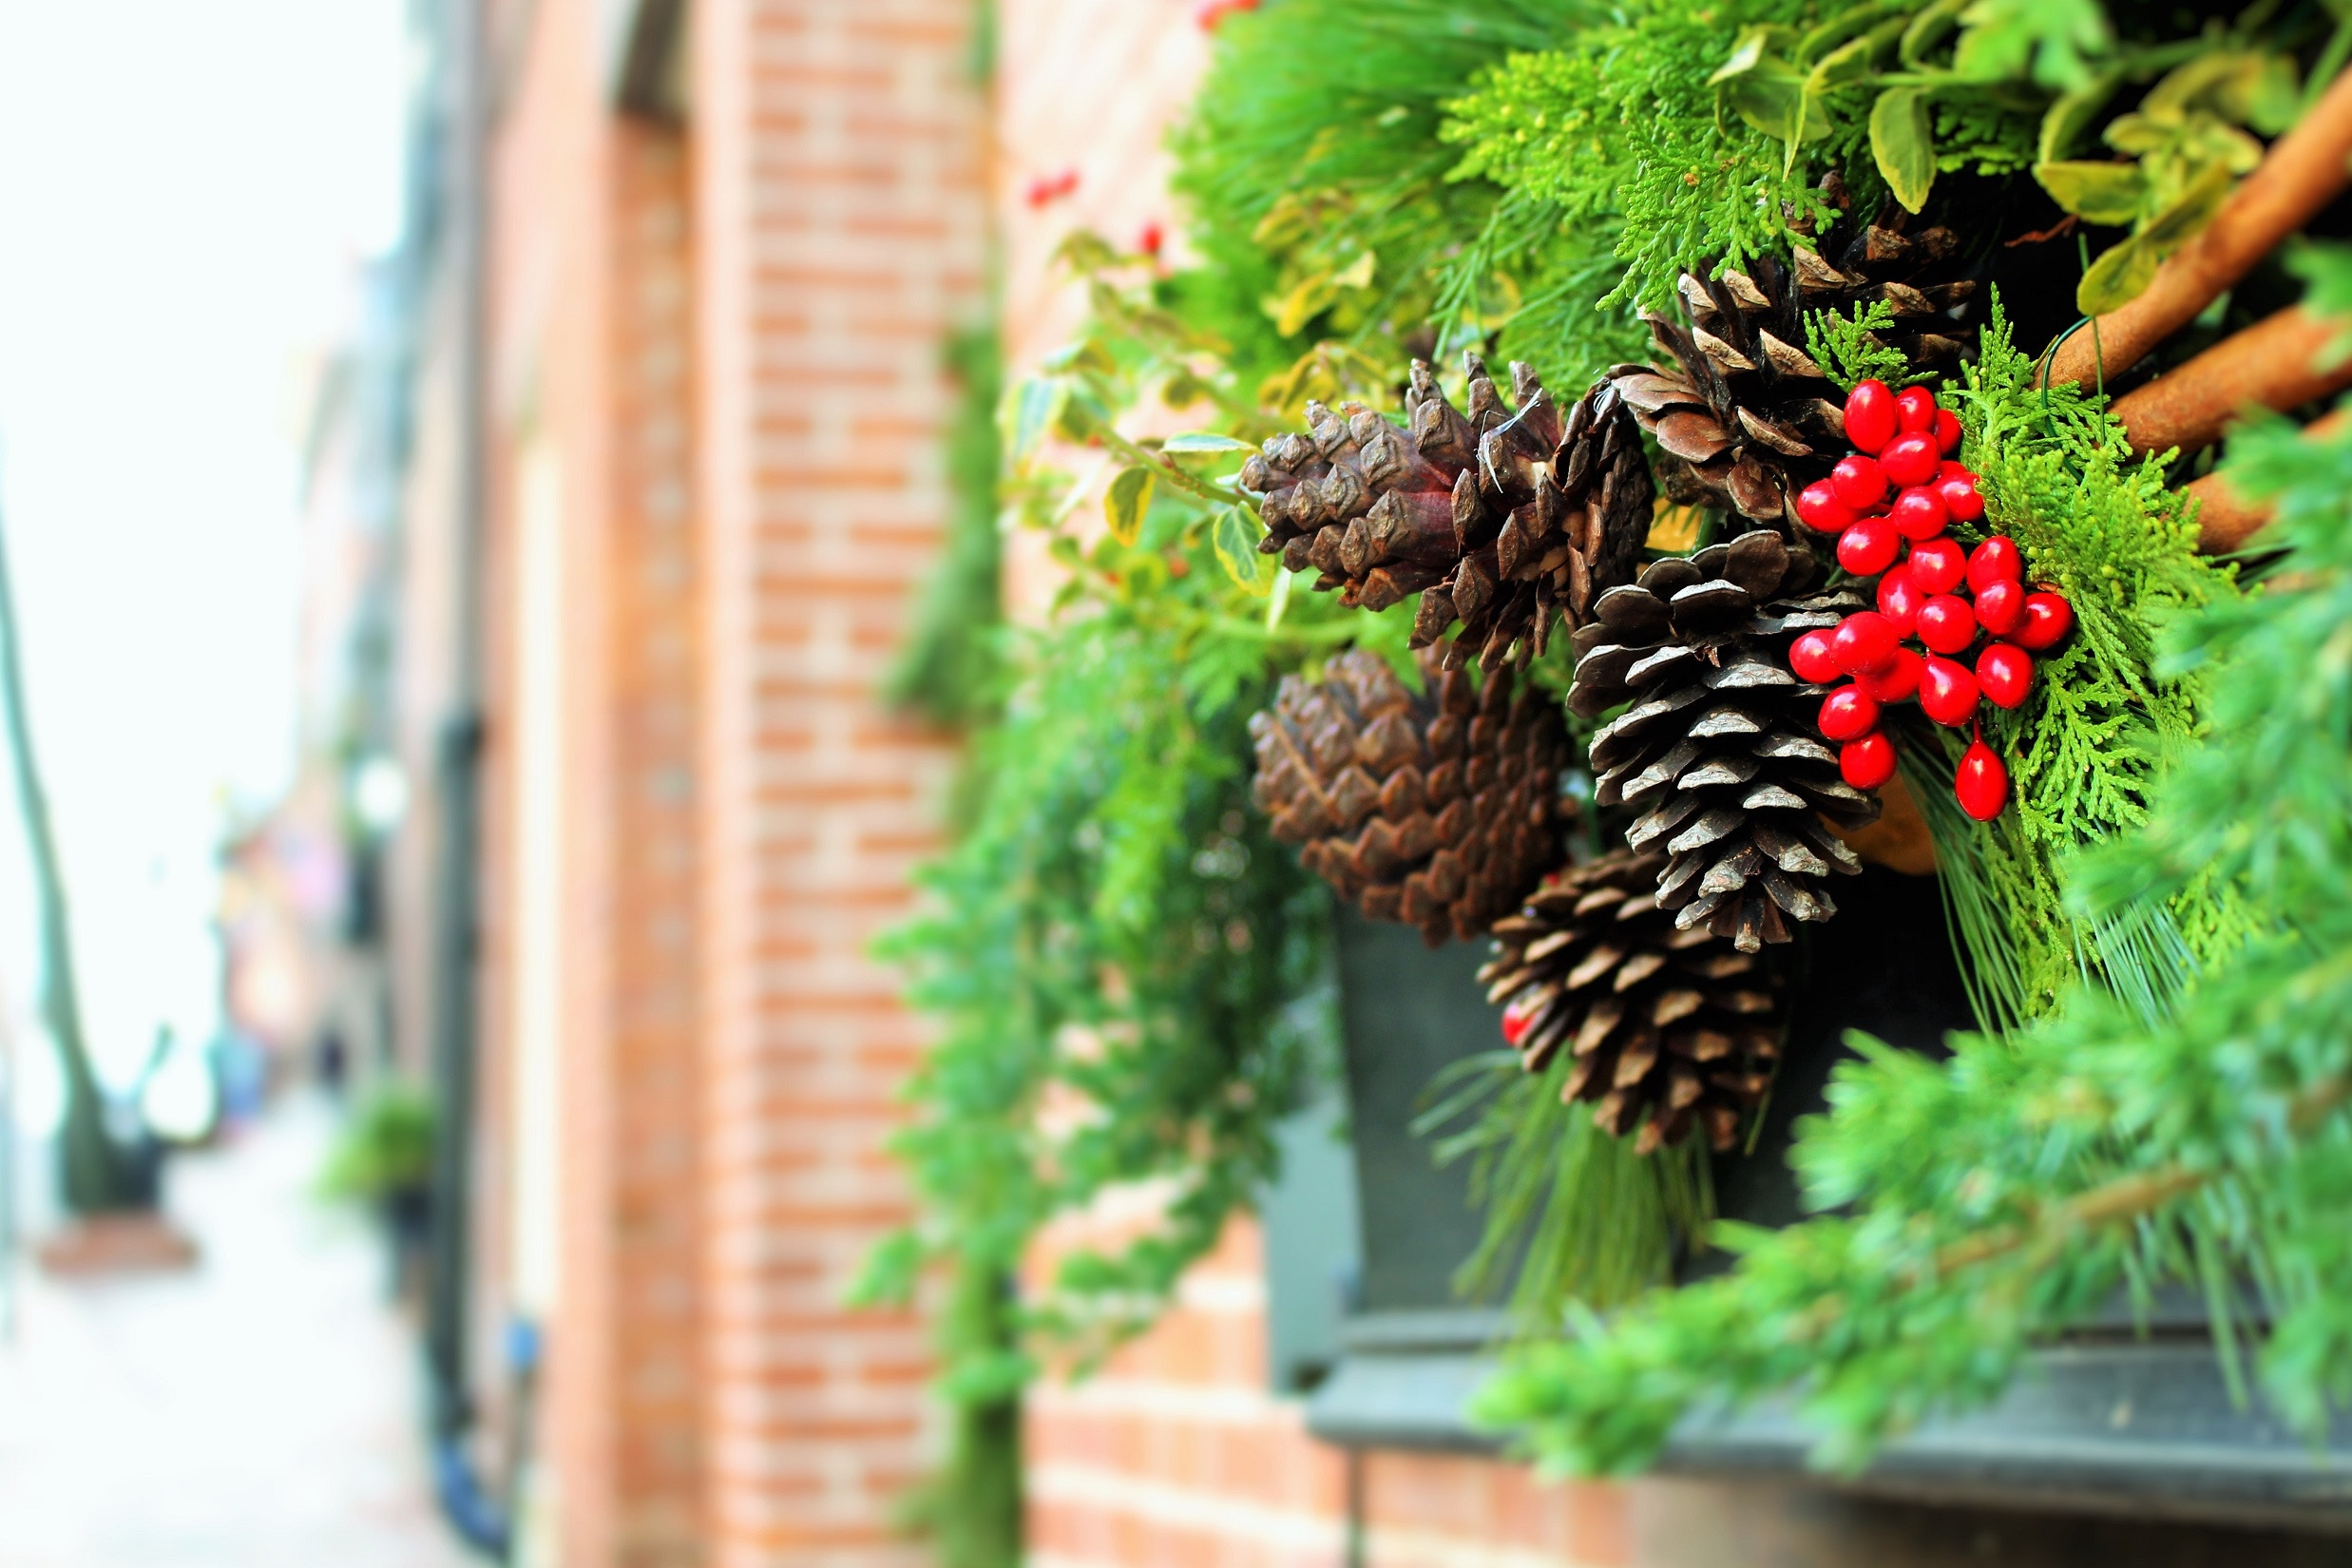 Image of a holiday garland on the side of a brick building